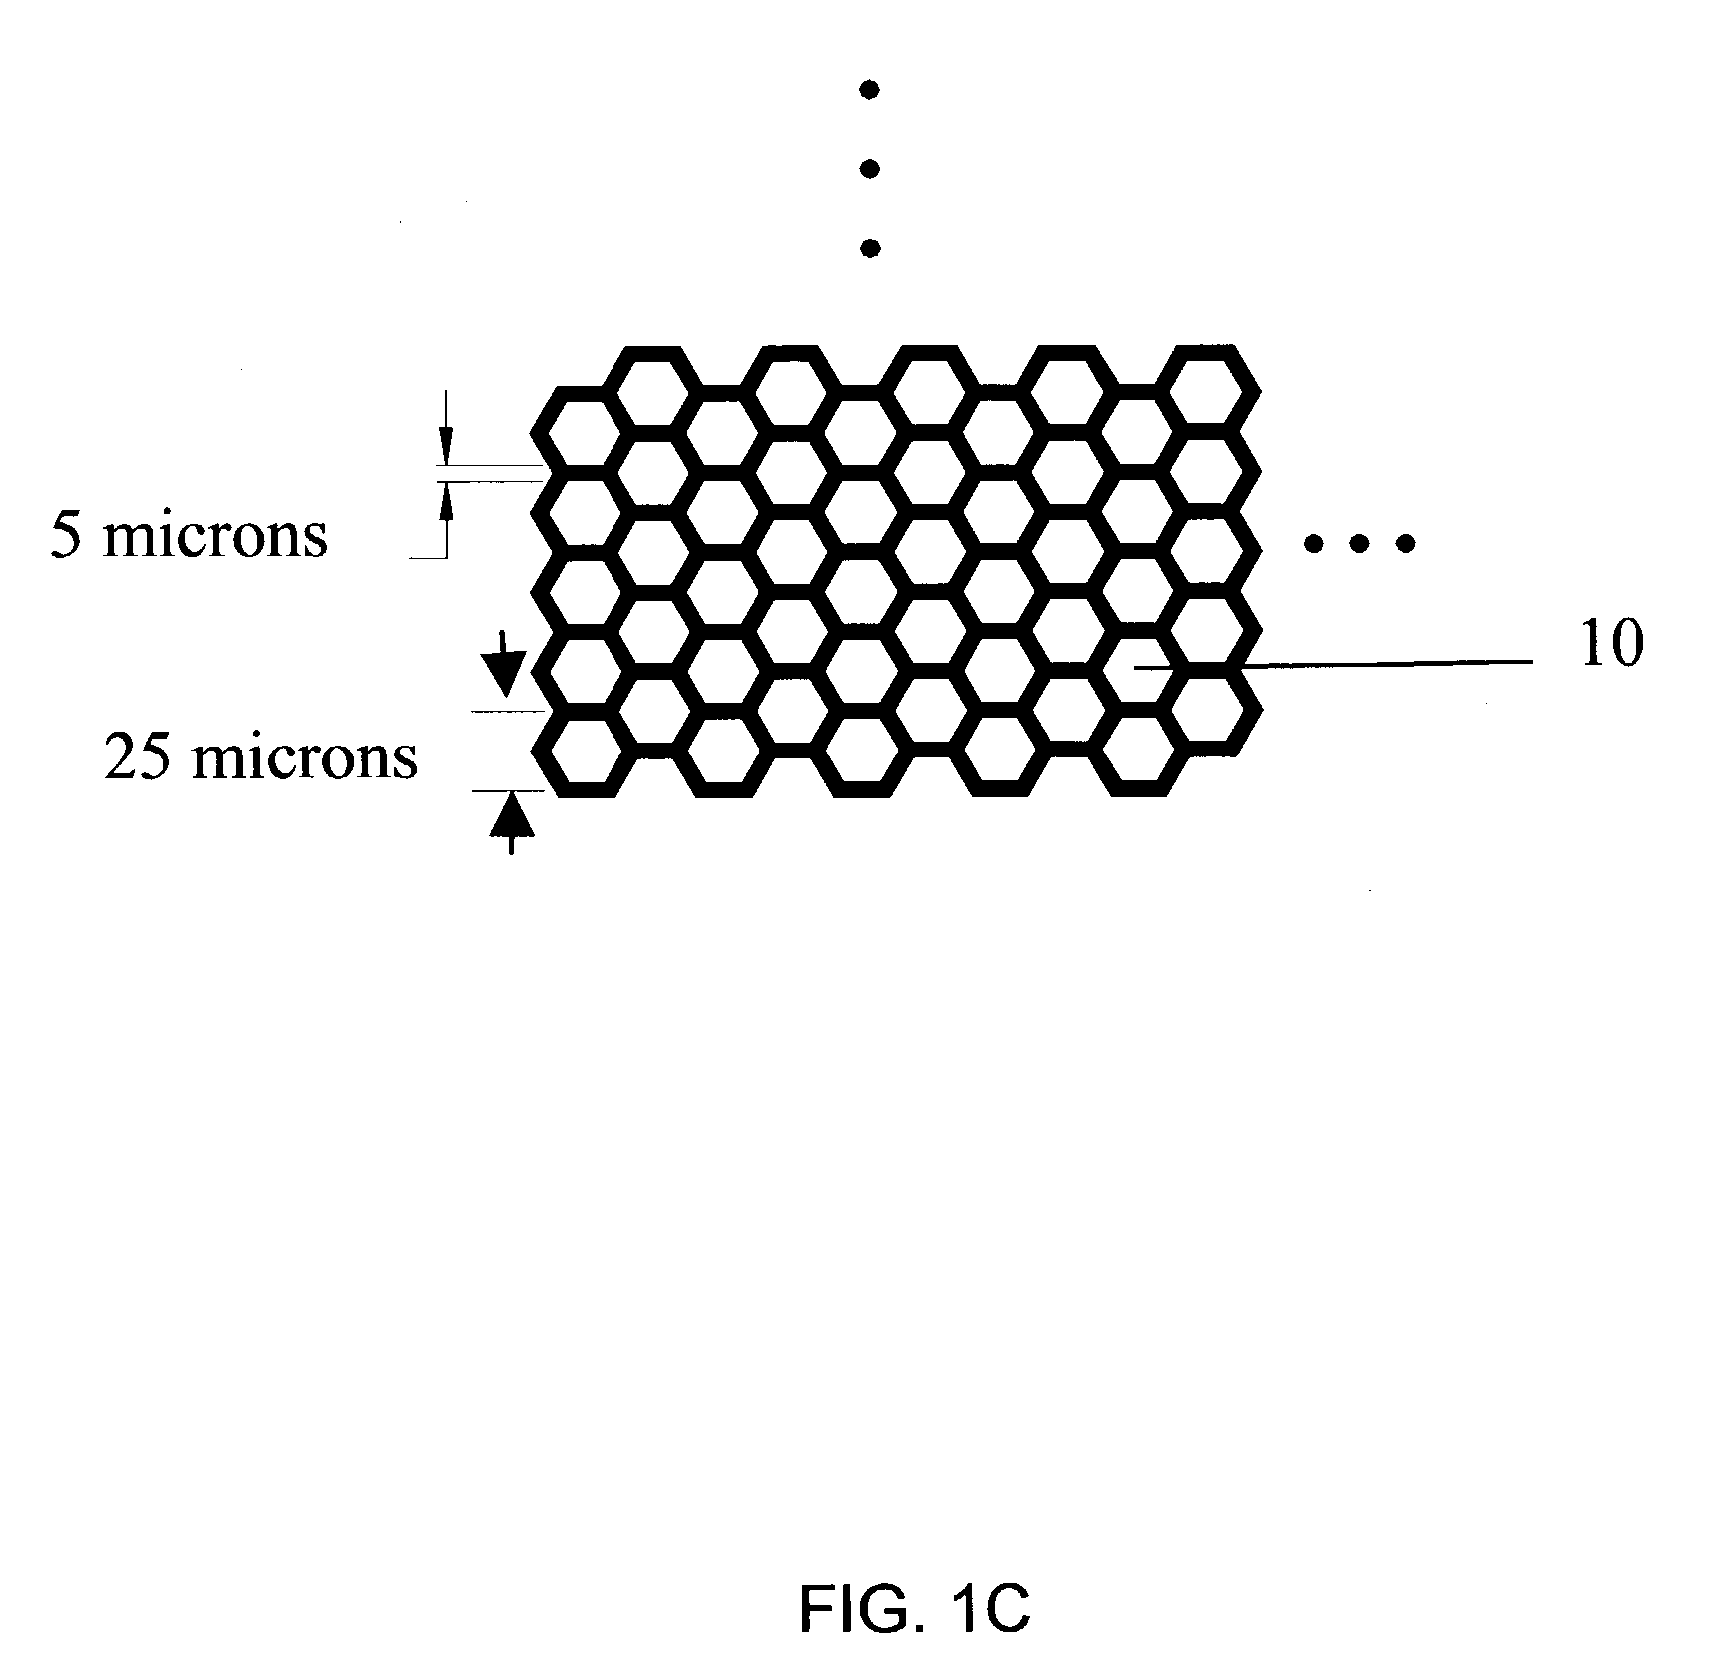 High surface area substrates for microarrays and methods to make same